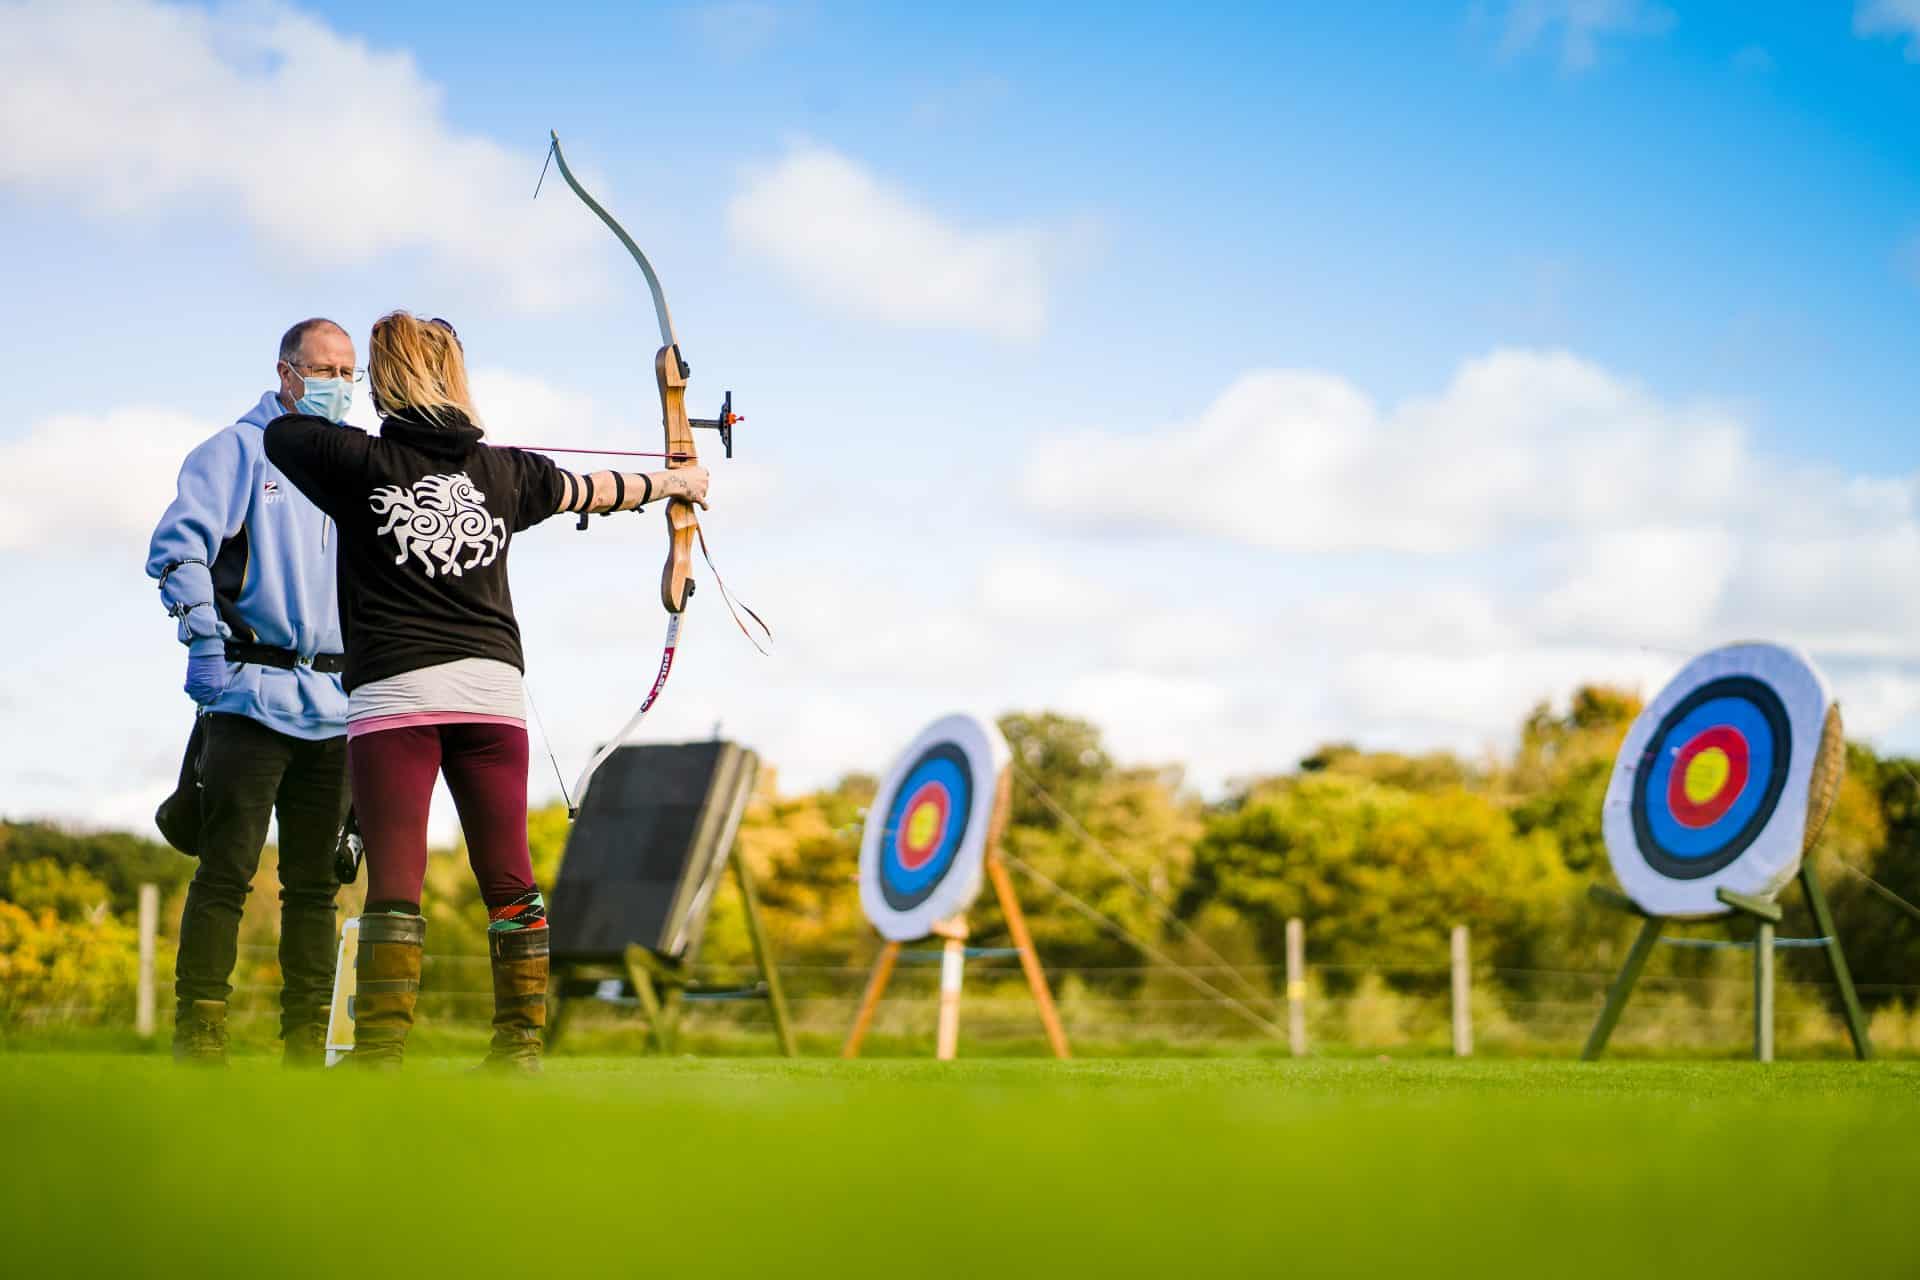 Archery makes strong case for special consideration when lockdown restrictions lifted